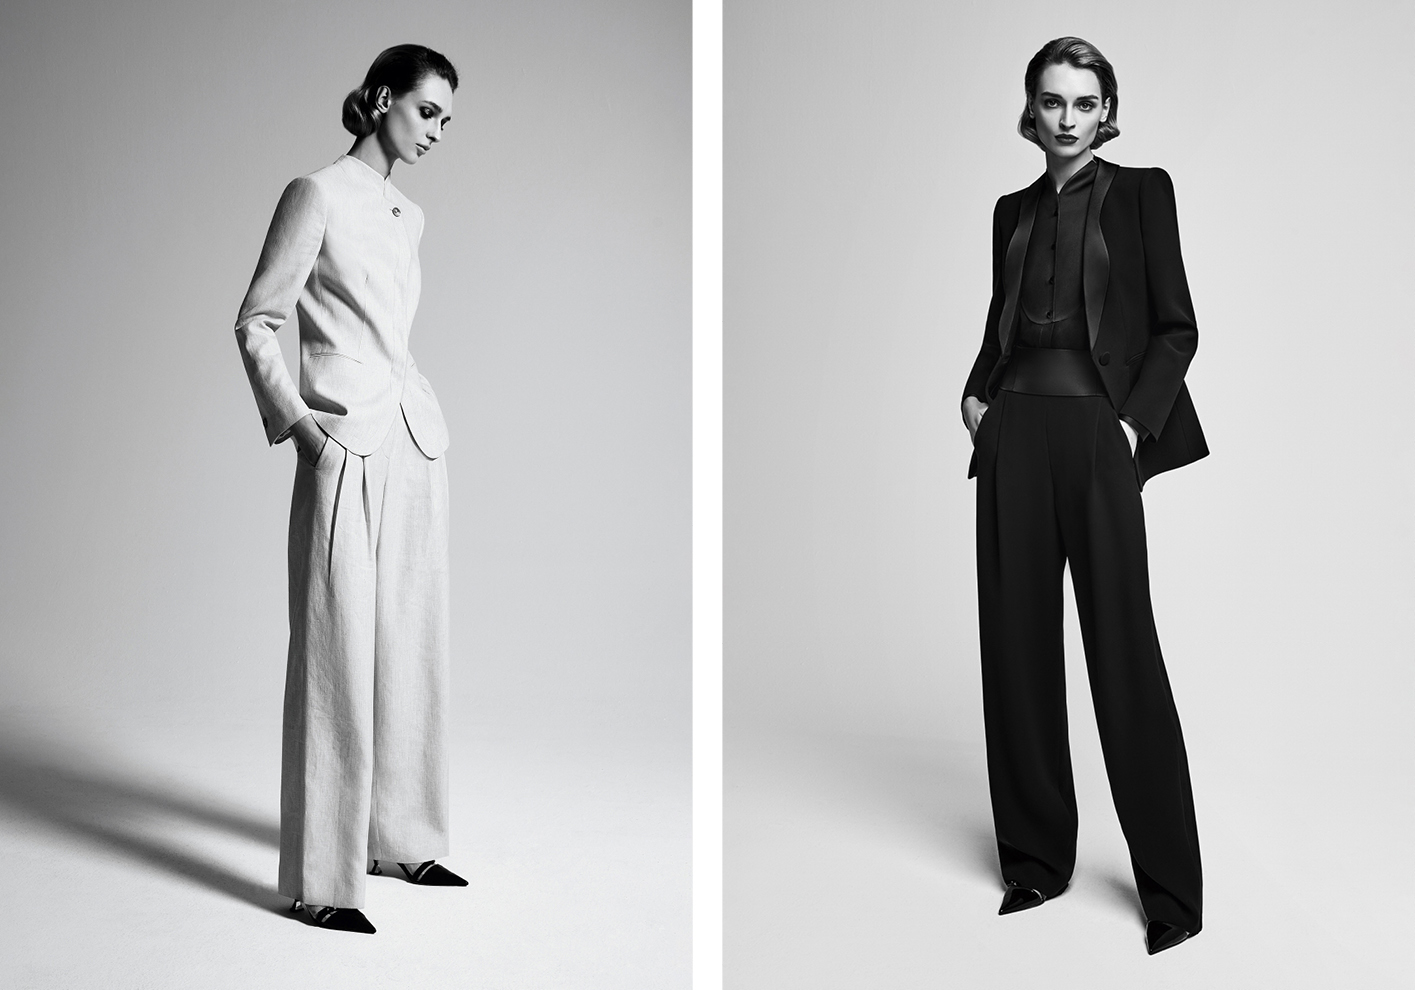 This season sees the launch of Made to Order for Giorgio Armani’s womenswear